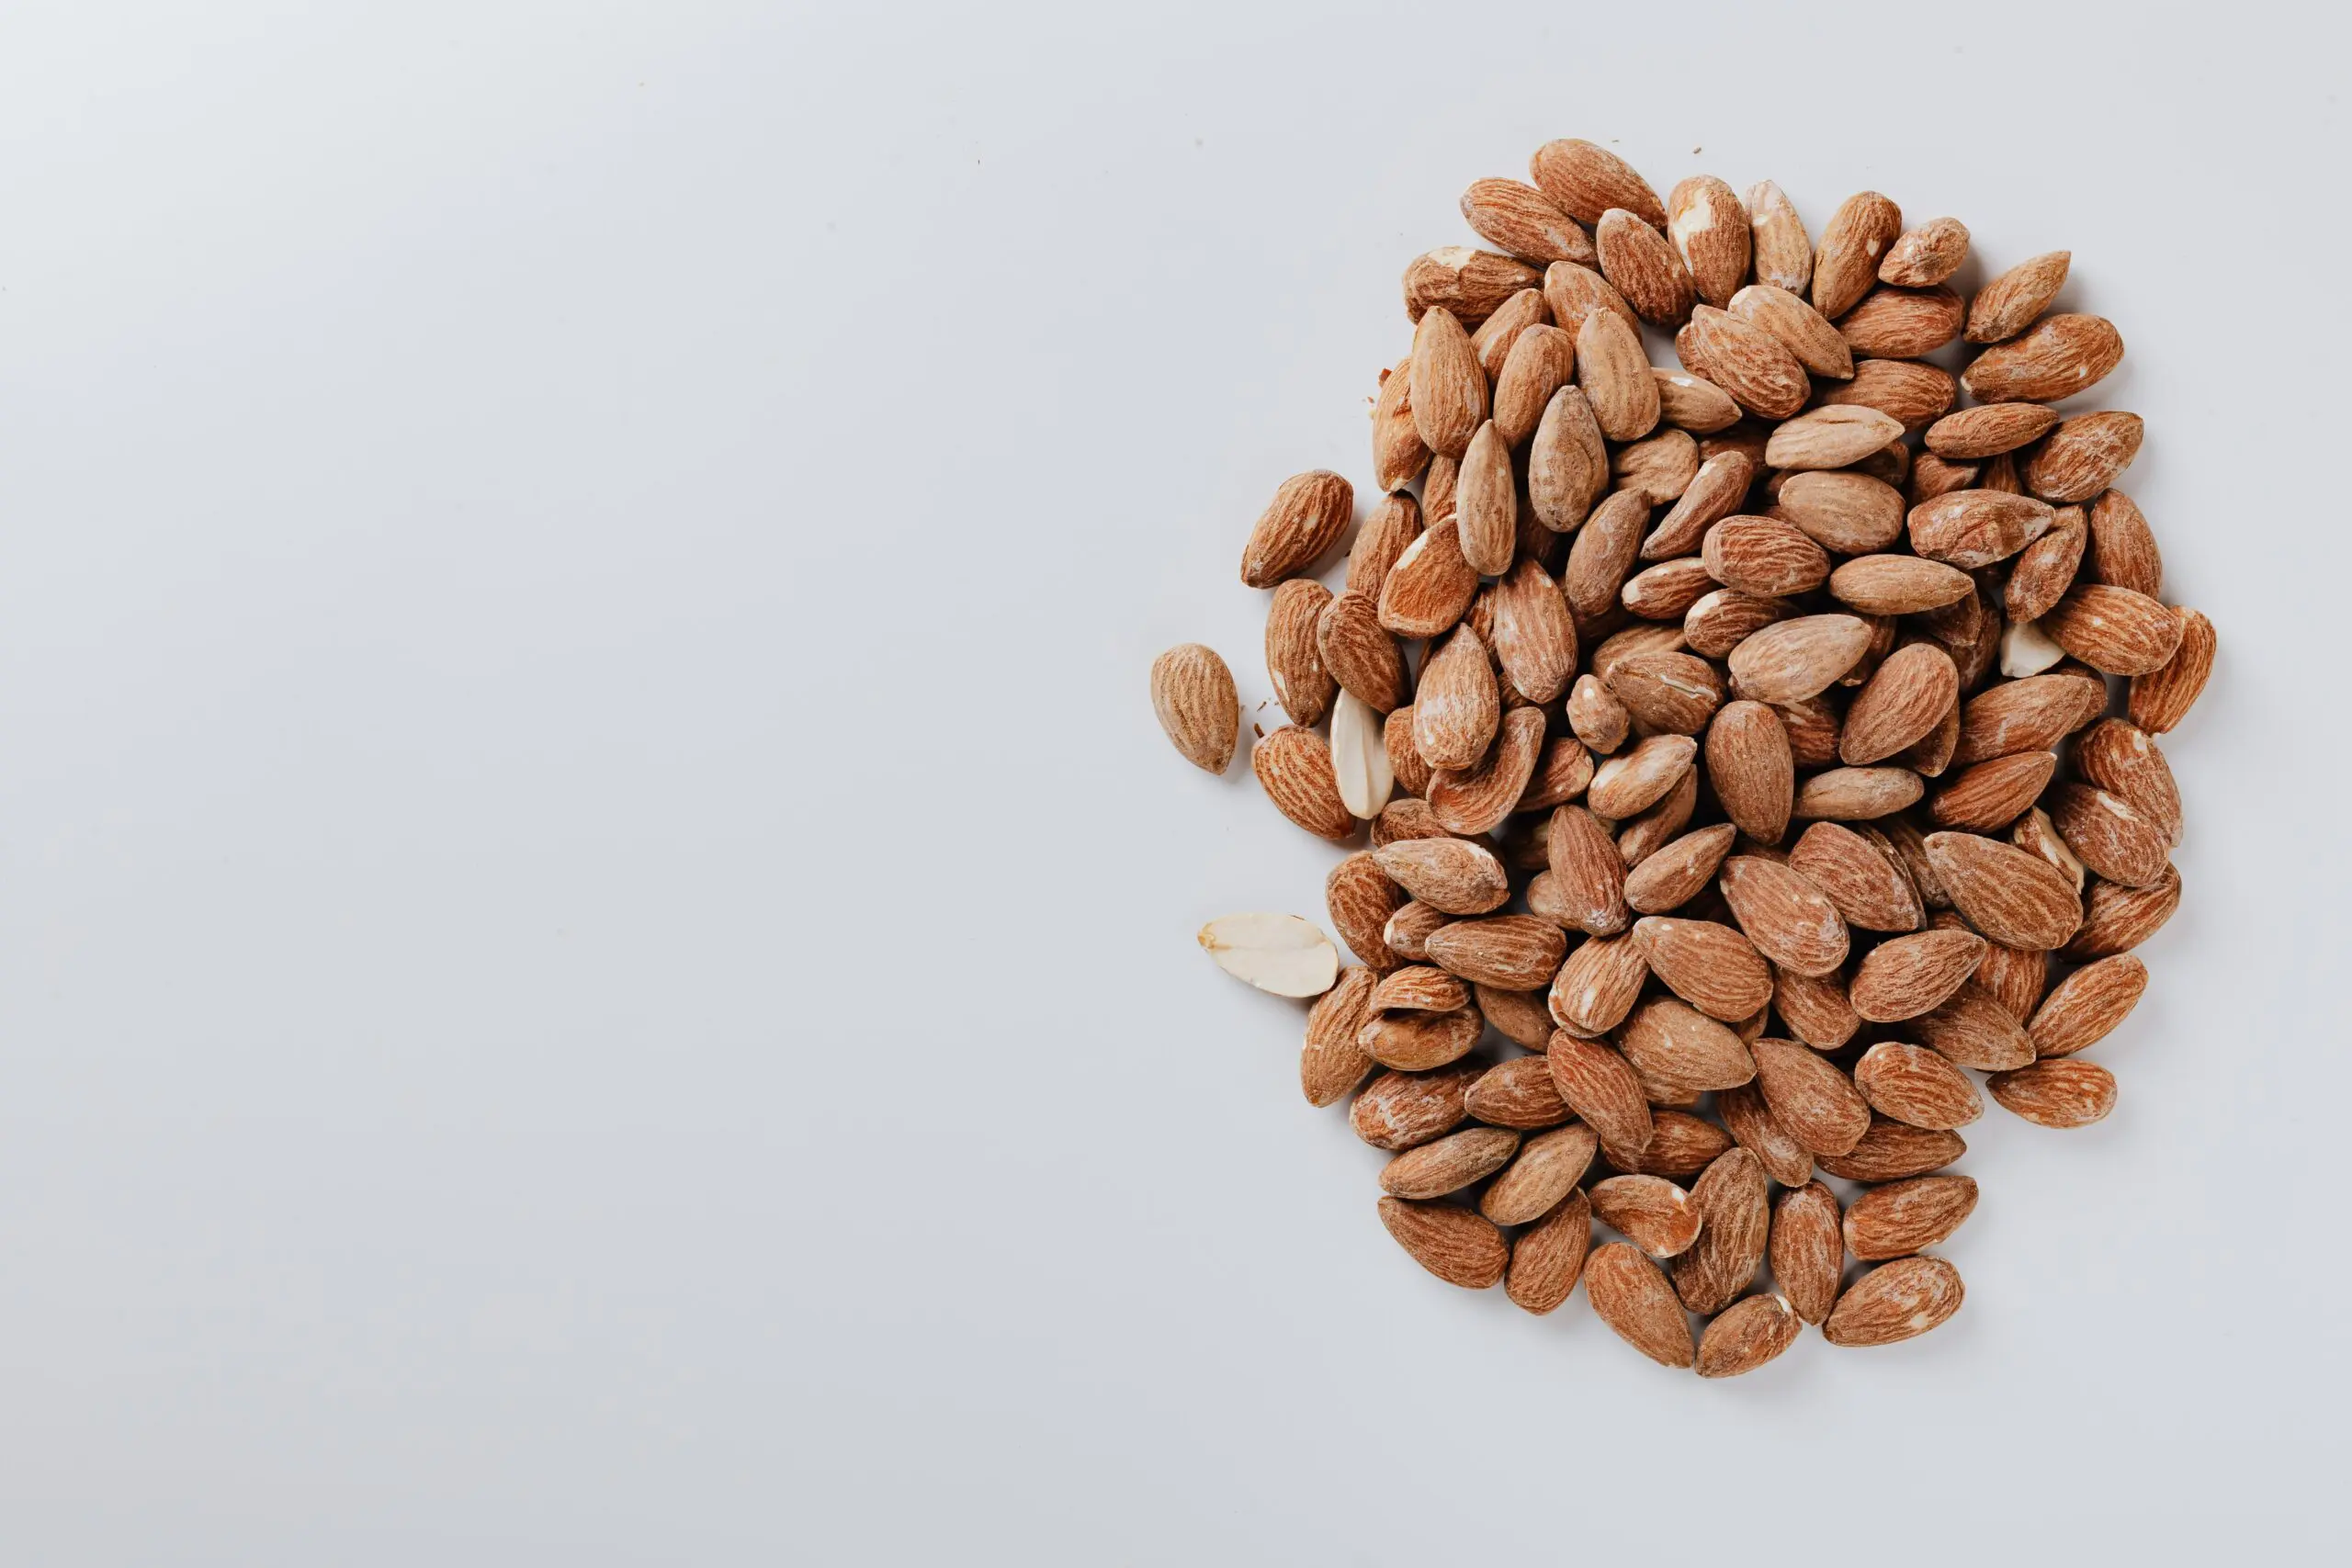 Almonds scaled